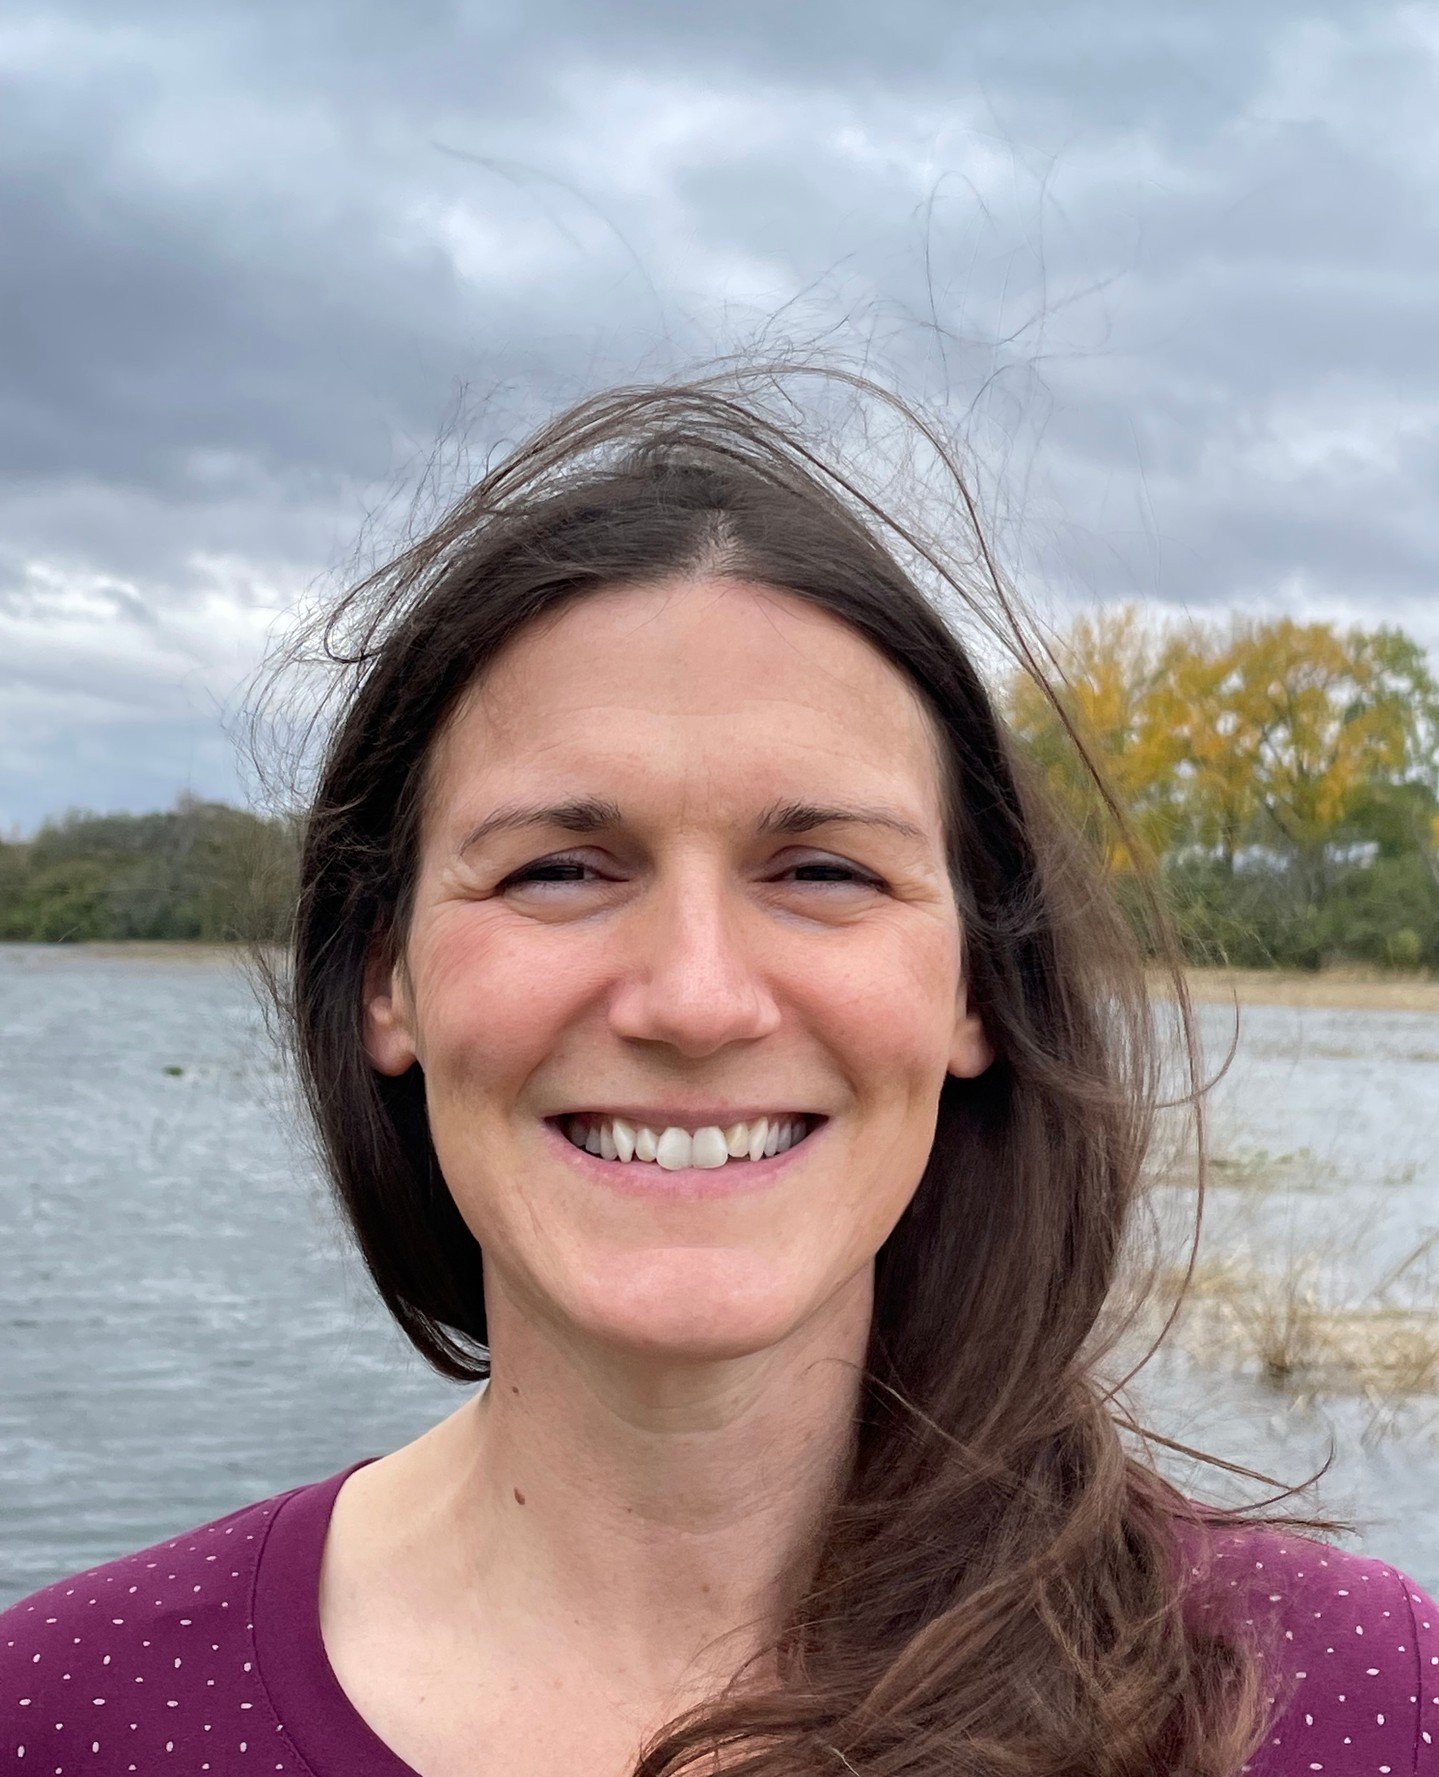 ⁠ Meet Samantha VanWechel-Meyer one of the 10 winners from across the state who was chosen for her ongoing dedication to #LovingWhereWeLive. ⁠⁠In 2017, Samantha discovered a deep love of Minnesota’s lakes, rivers, and waterways, but she also discovered just how much trash finds its way into these beautiful places. Since then, it has been her passion project to clean up the waters surrounding her home in Fergus Falls, focusing especially on the Otter Tail River. Samantha describes the beauty of the river’s plants, wildlife, and water, saying that when she’s with the river, she’s at peace.⁠⁠Samantha has found that her efforts improve not only the environment around her, but also her own personal wellbeing. She hopes to engage others with her efforts and help them understand the importance of the Otter Tail River through her social media presence, by organizing Otter Tail cleanup events, and by introducing her young children to the river and her efforts to protect it.⁠ ⁠⁠#Upstream #MN⁠ — from Instagram